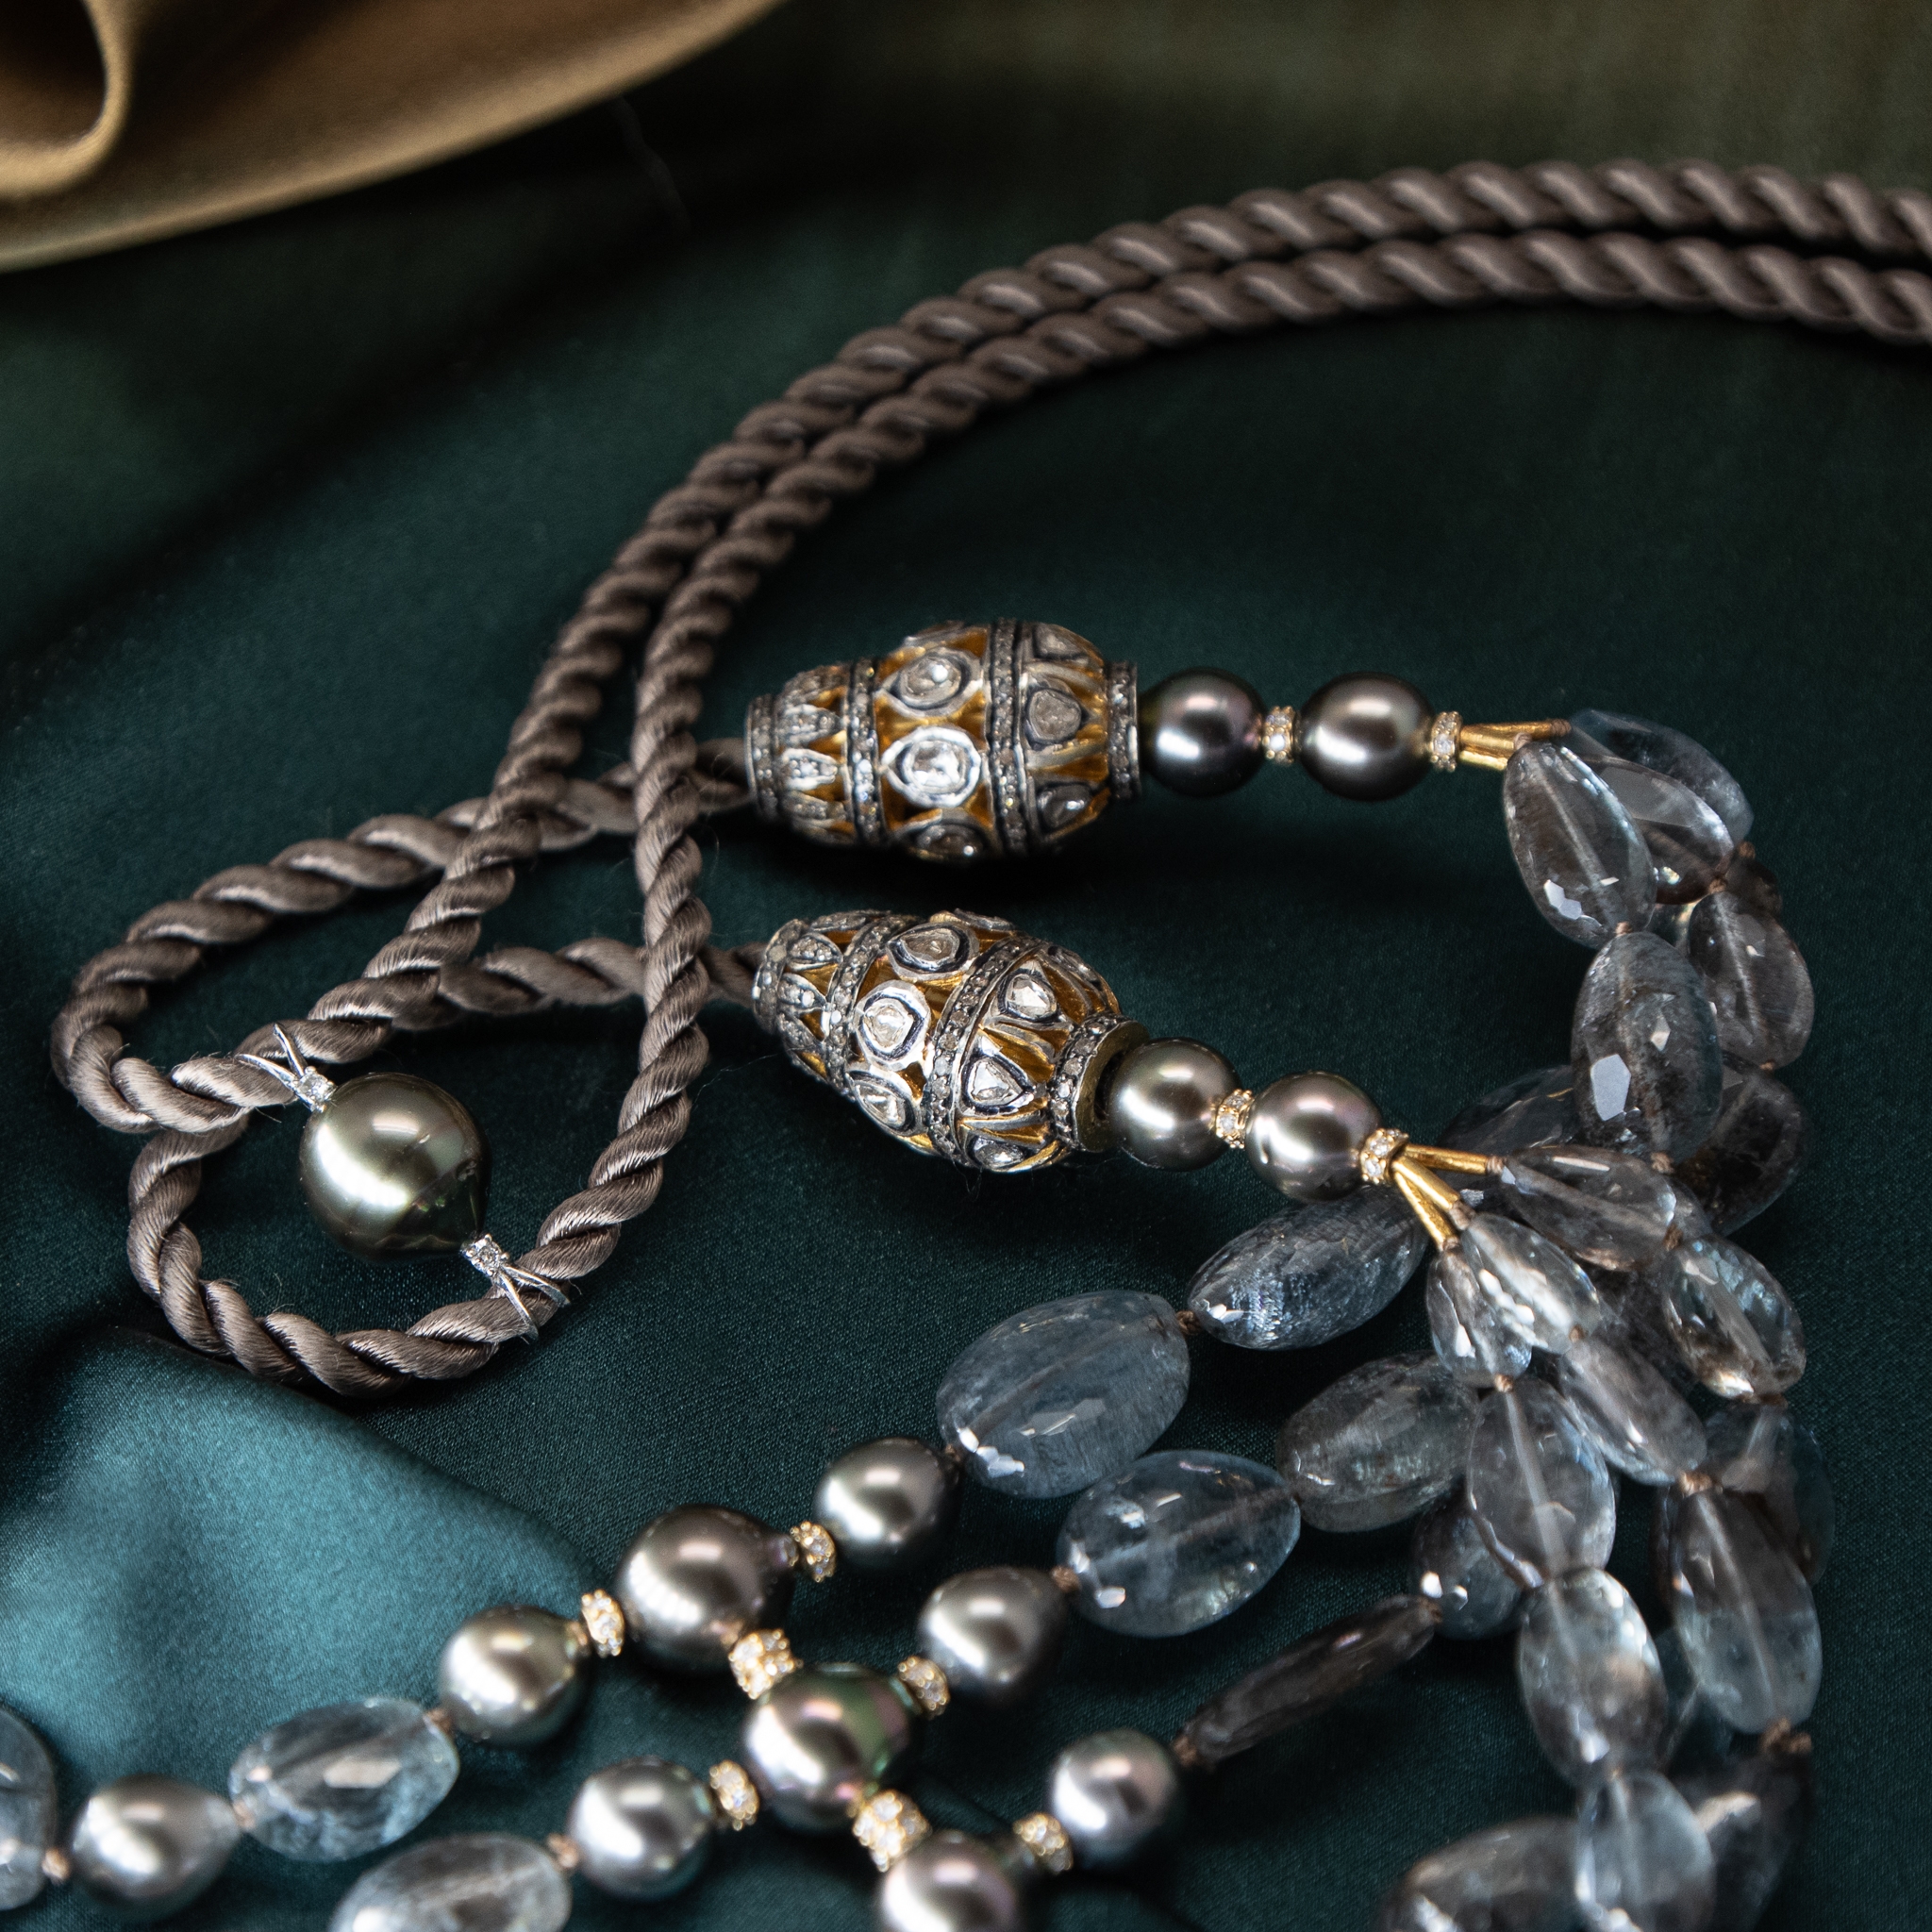 Slider clasp and detail of Tahitian pearl and Moss Aquamarine necklace